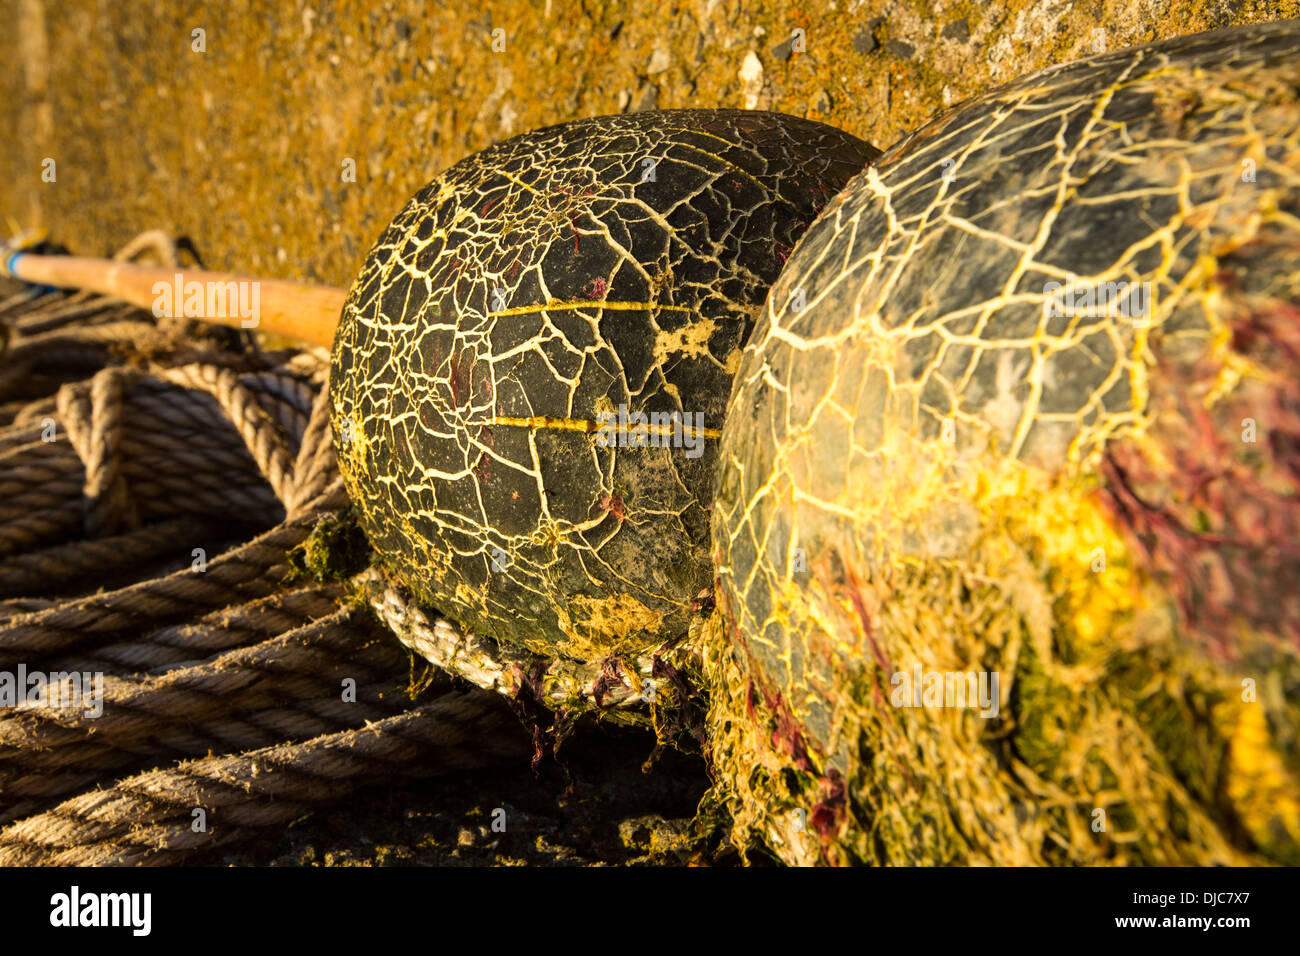 Crack patterns on floats on a lobster pot marker in Craster, Northumberland, UK, glowing at sunset. Stock Photo